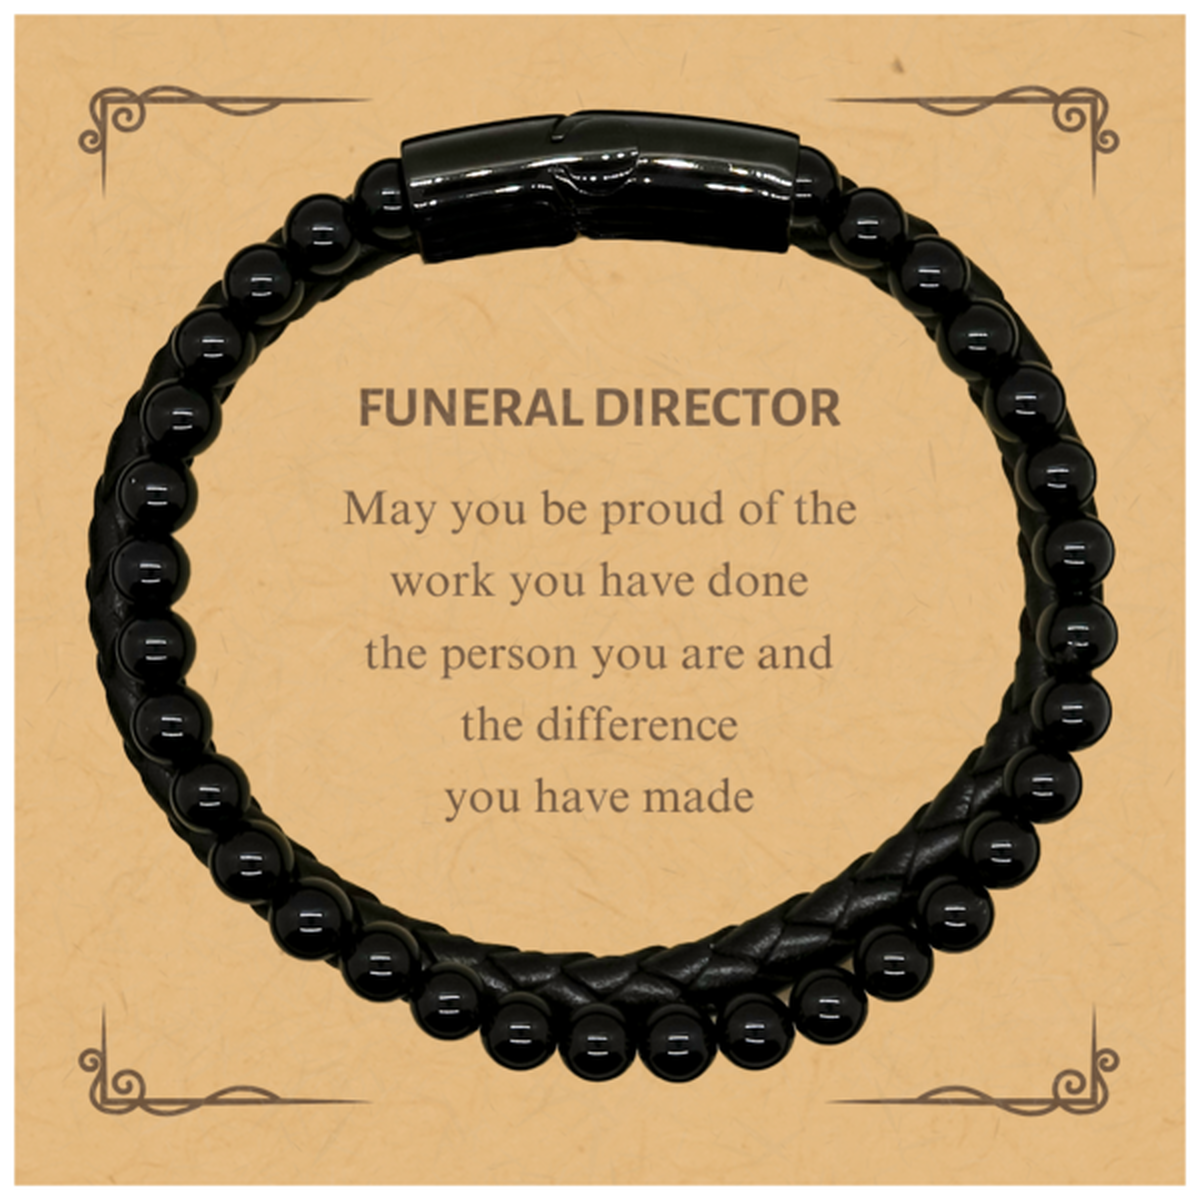 Funeral Director May you be proud of the work you have done, Retirement Funeral Director Stone Leather Bracelets for Colleague Appreciation Gifts Amazing for Funeral Director